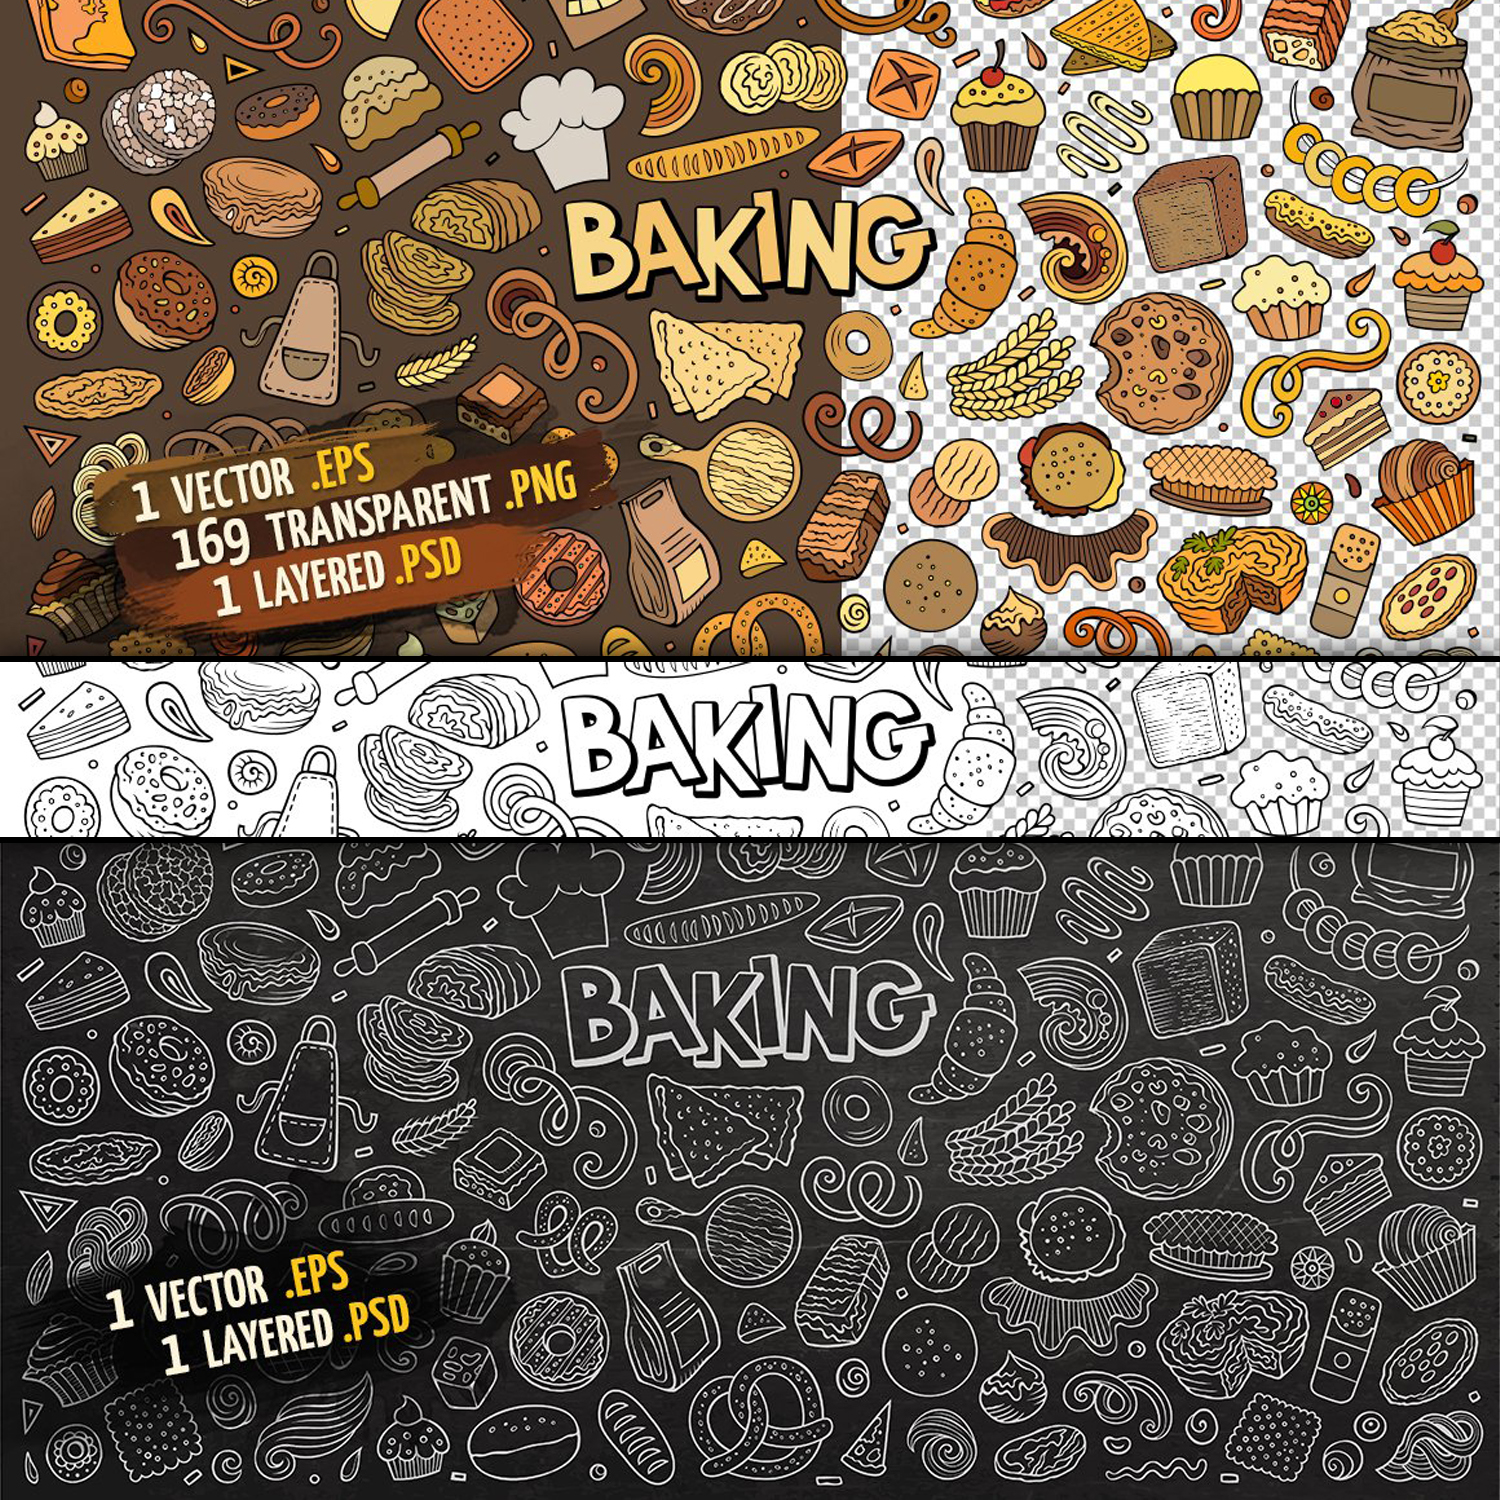 Cool objects on the topic of baking.